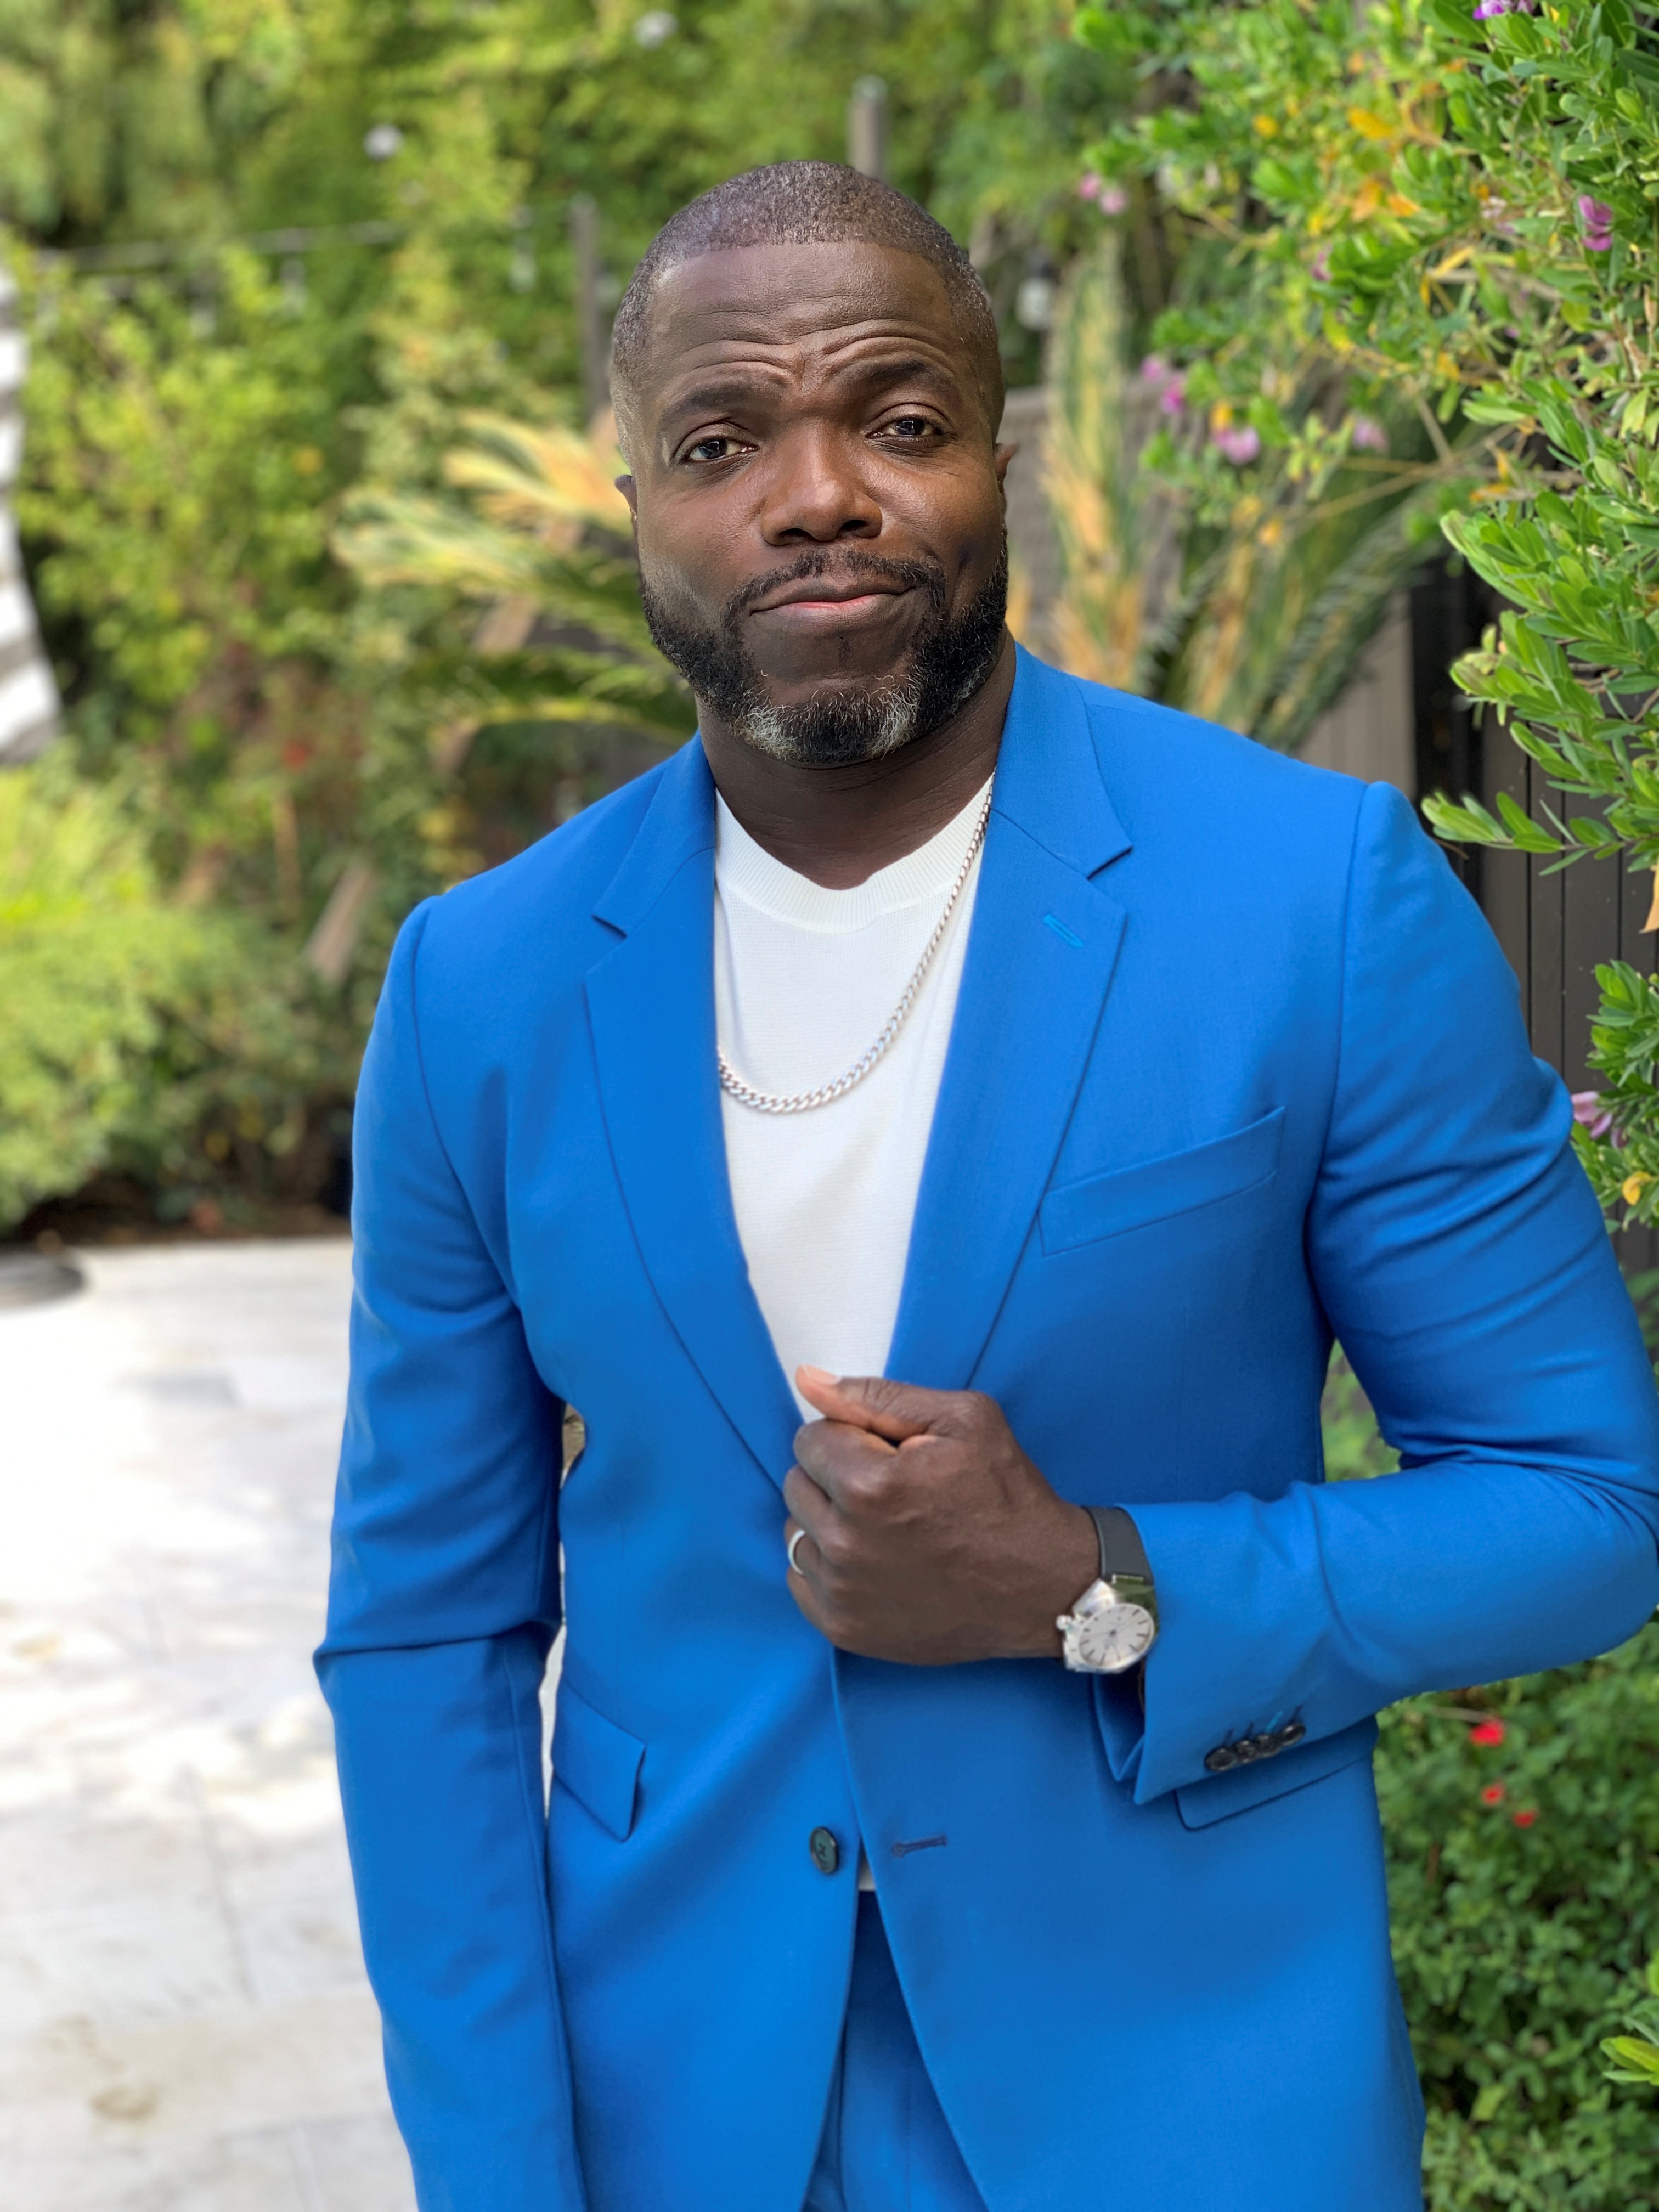 Reno Wilson gets ready for the 52nd NAACP Image Awards Virtual Experience on March 9, 2021 in Los Angeles, California. | Source: Getty Images